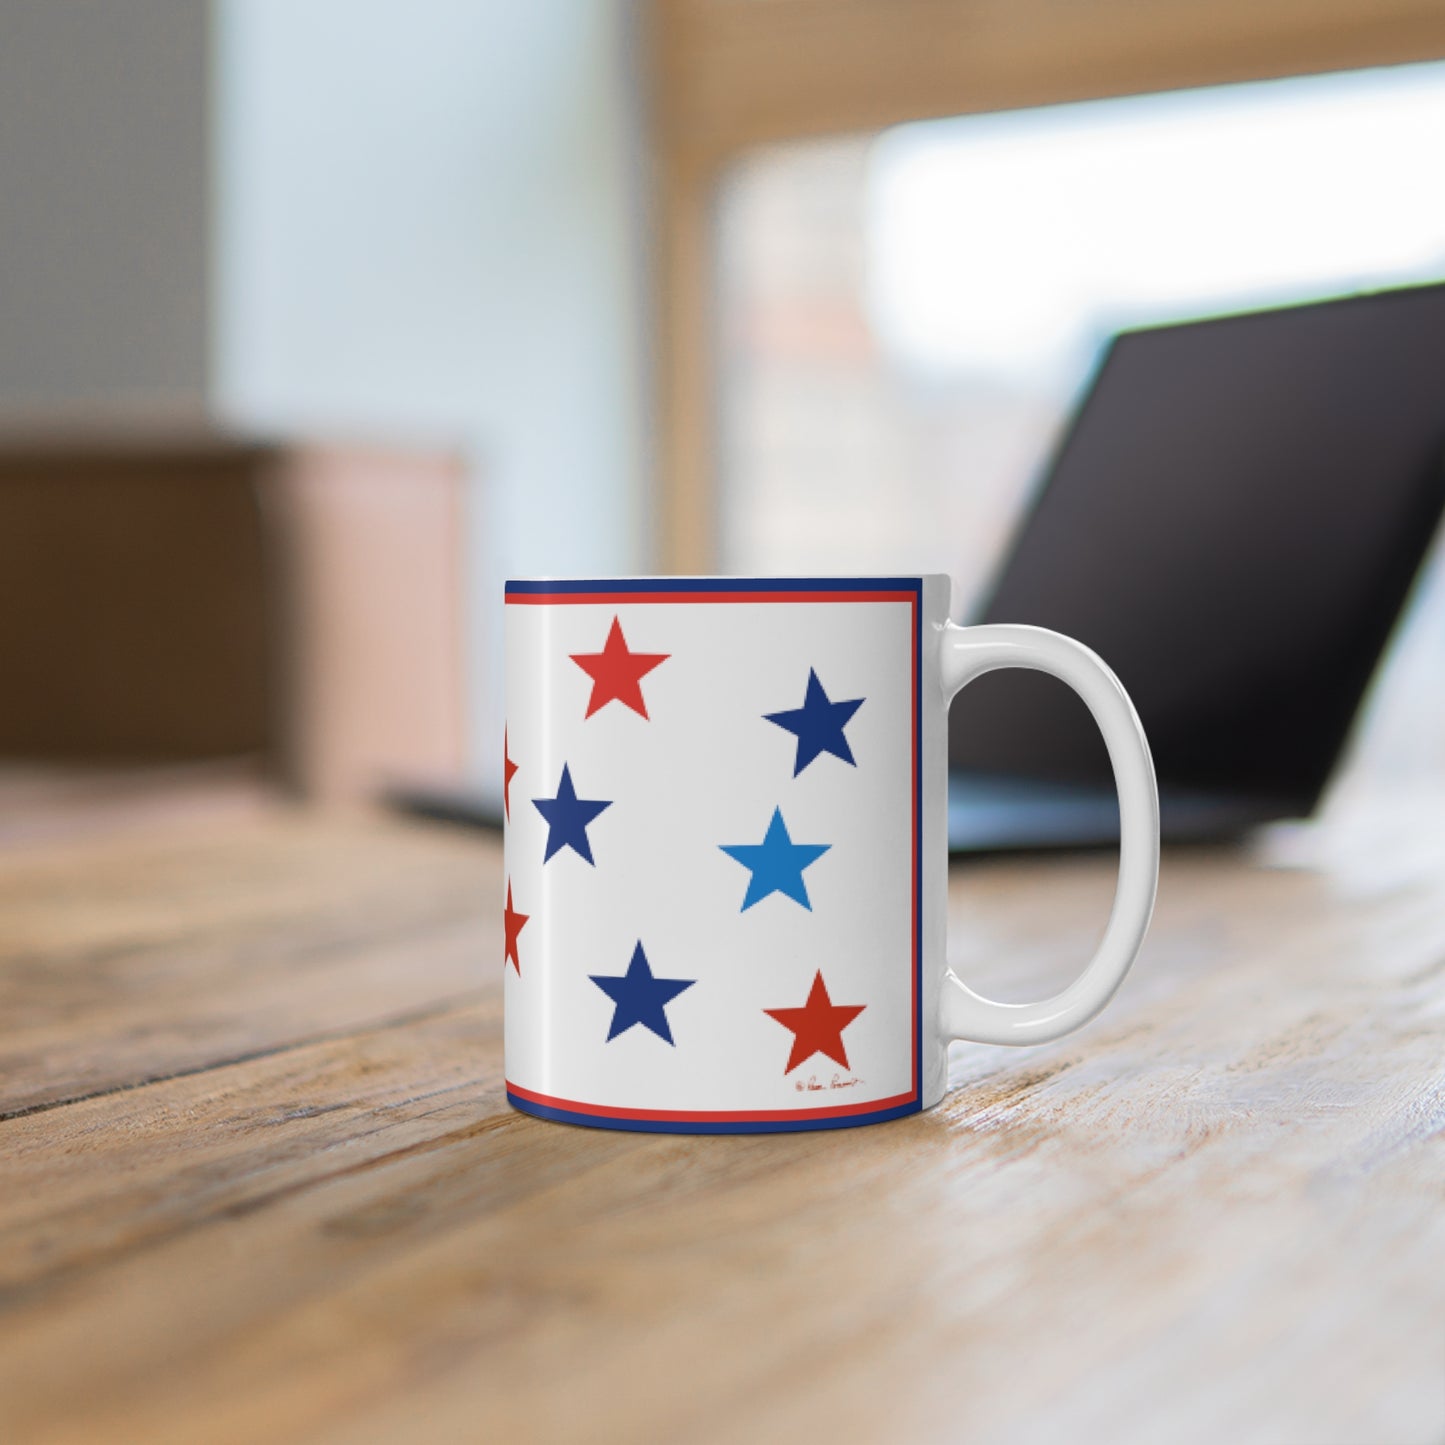 A Printify Mug with Stars: Blue and Red on White; Ceramic; 11 oz. sits on a wooden table, embodying a patriotic spirit. In the blurred background, a partially open laptop adds a modern touch to the cozy scene.